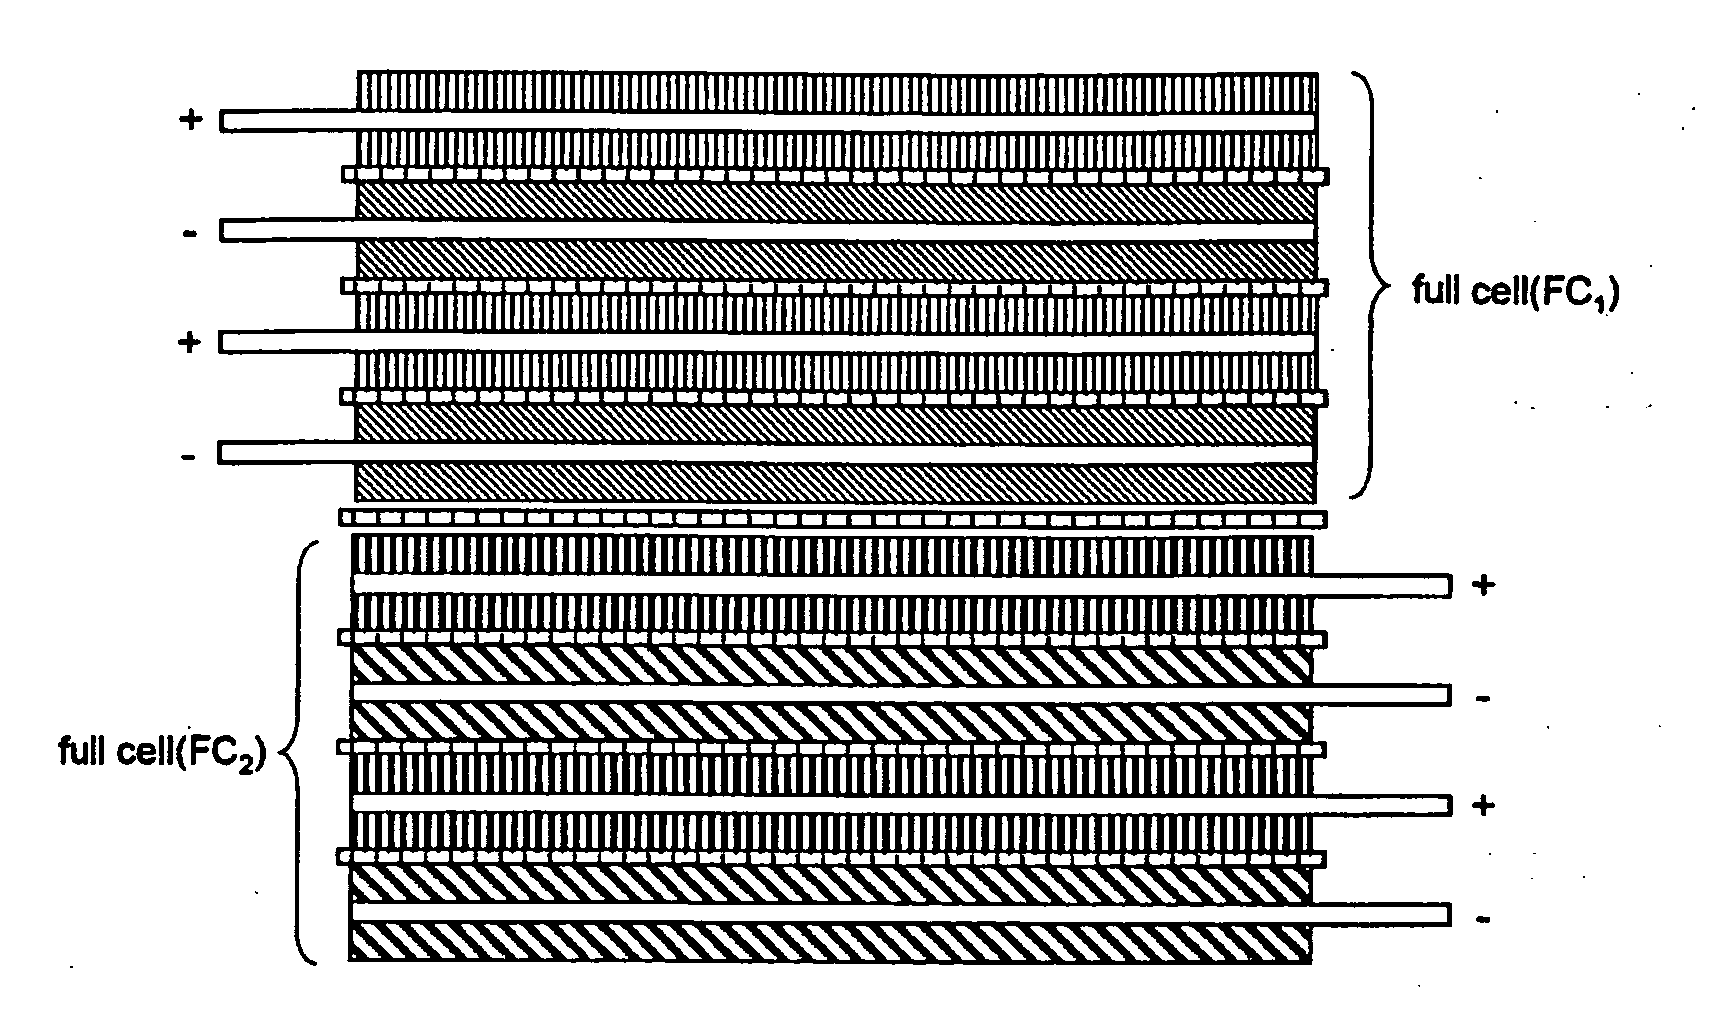 Stacking-typed secondary battery providing two or more operation voltages